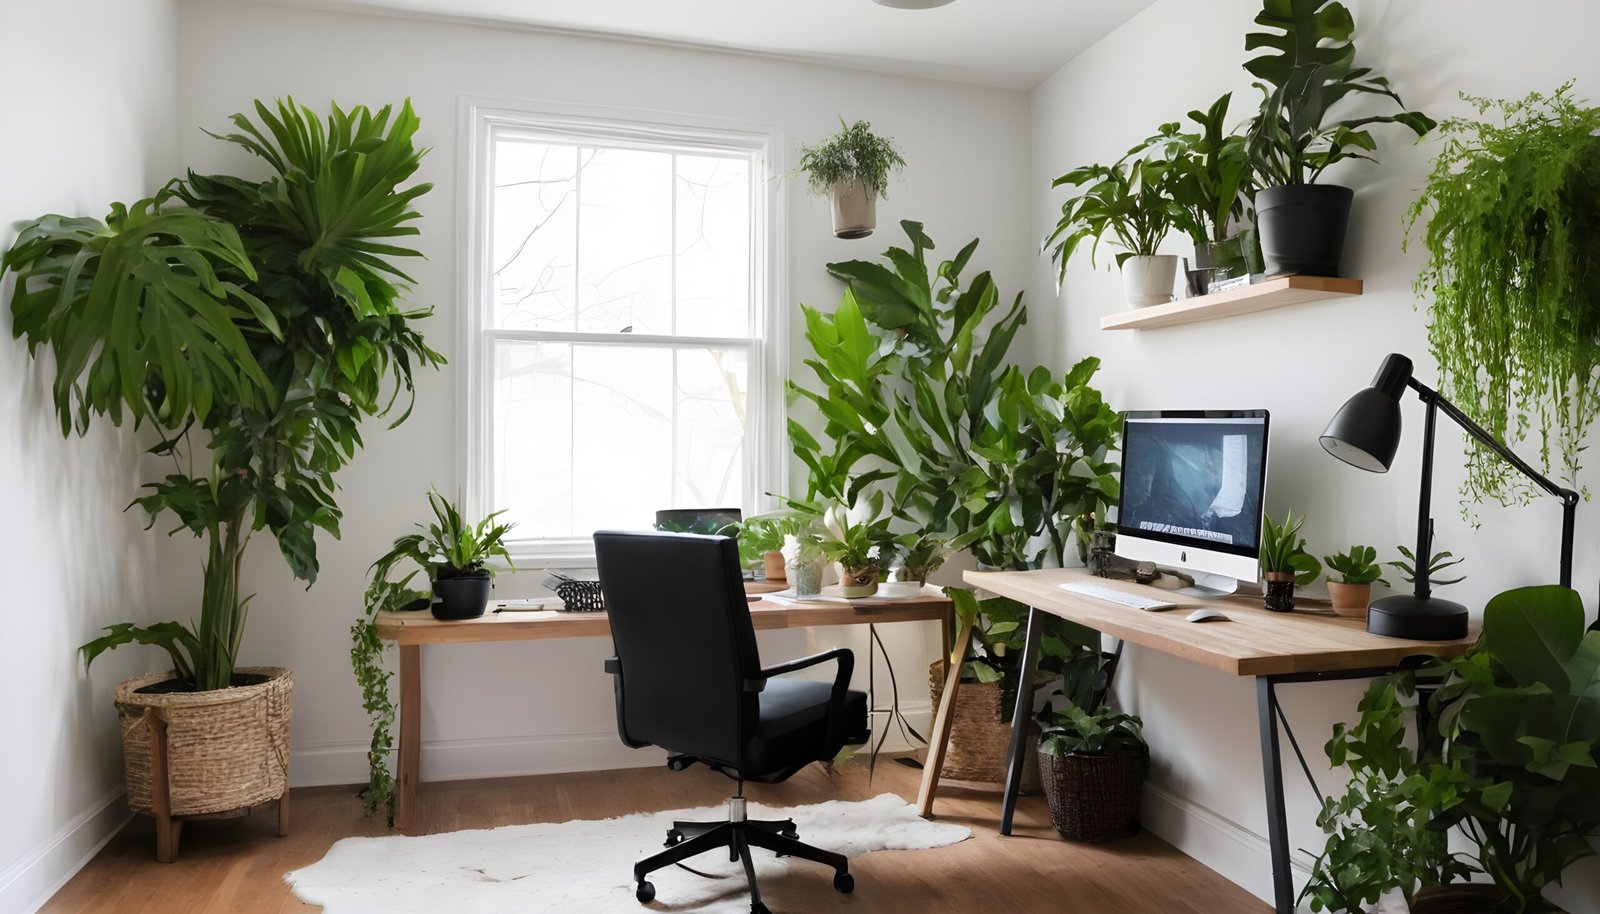 At home office with a desk, chair and lots of plants.